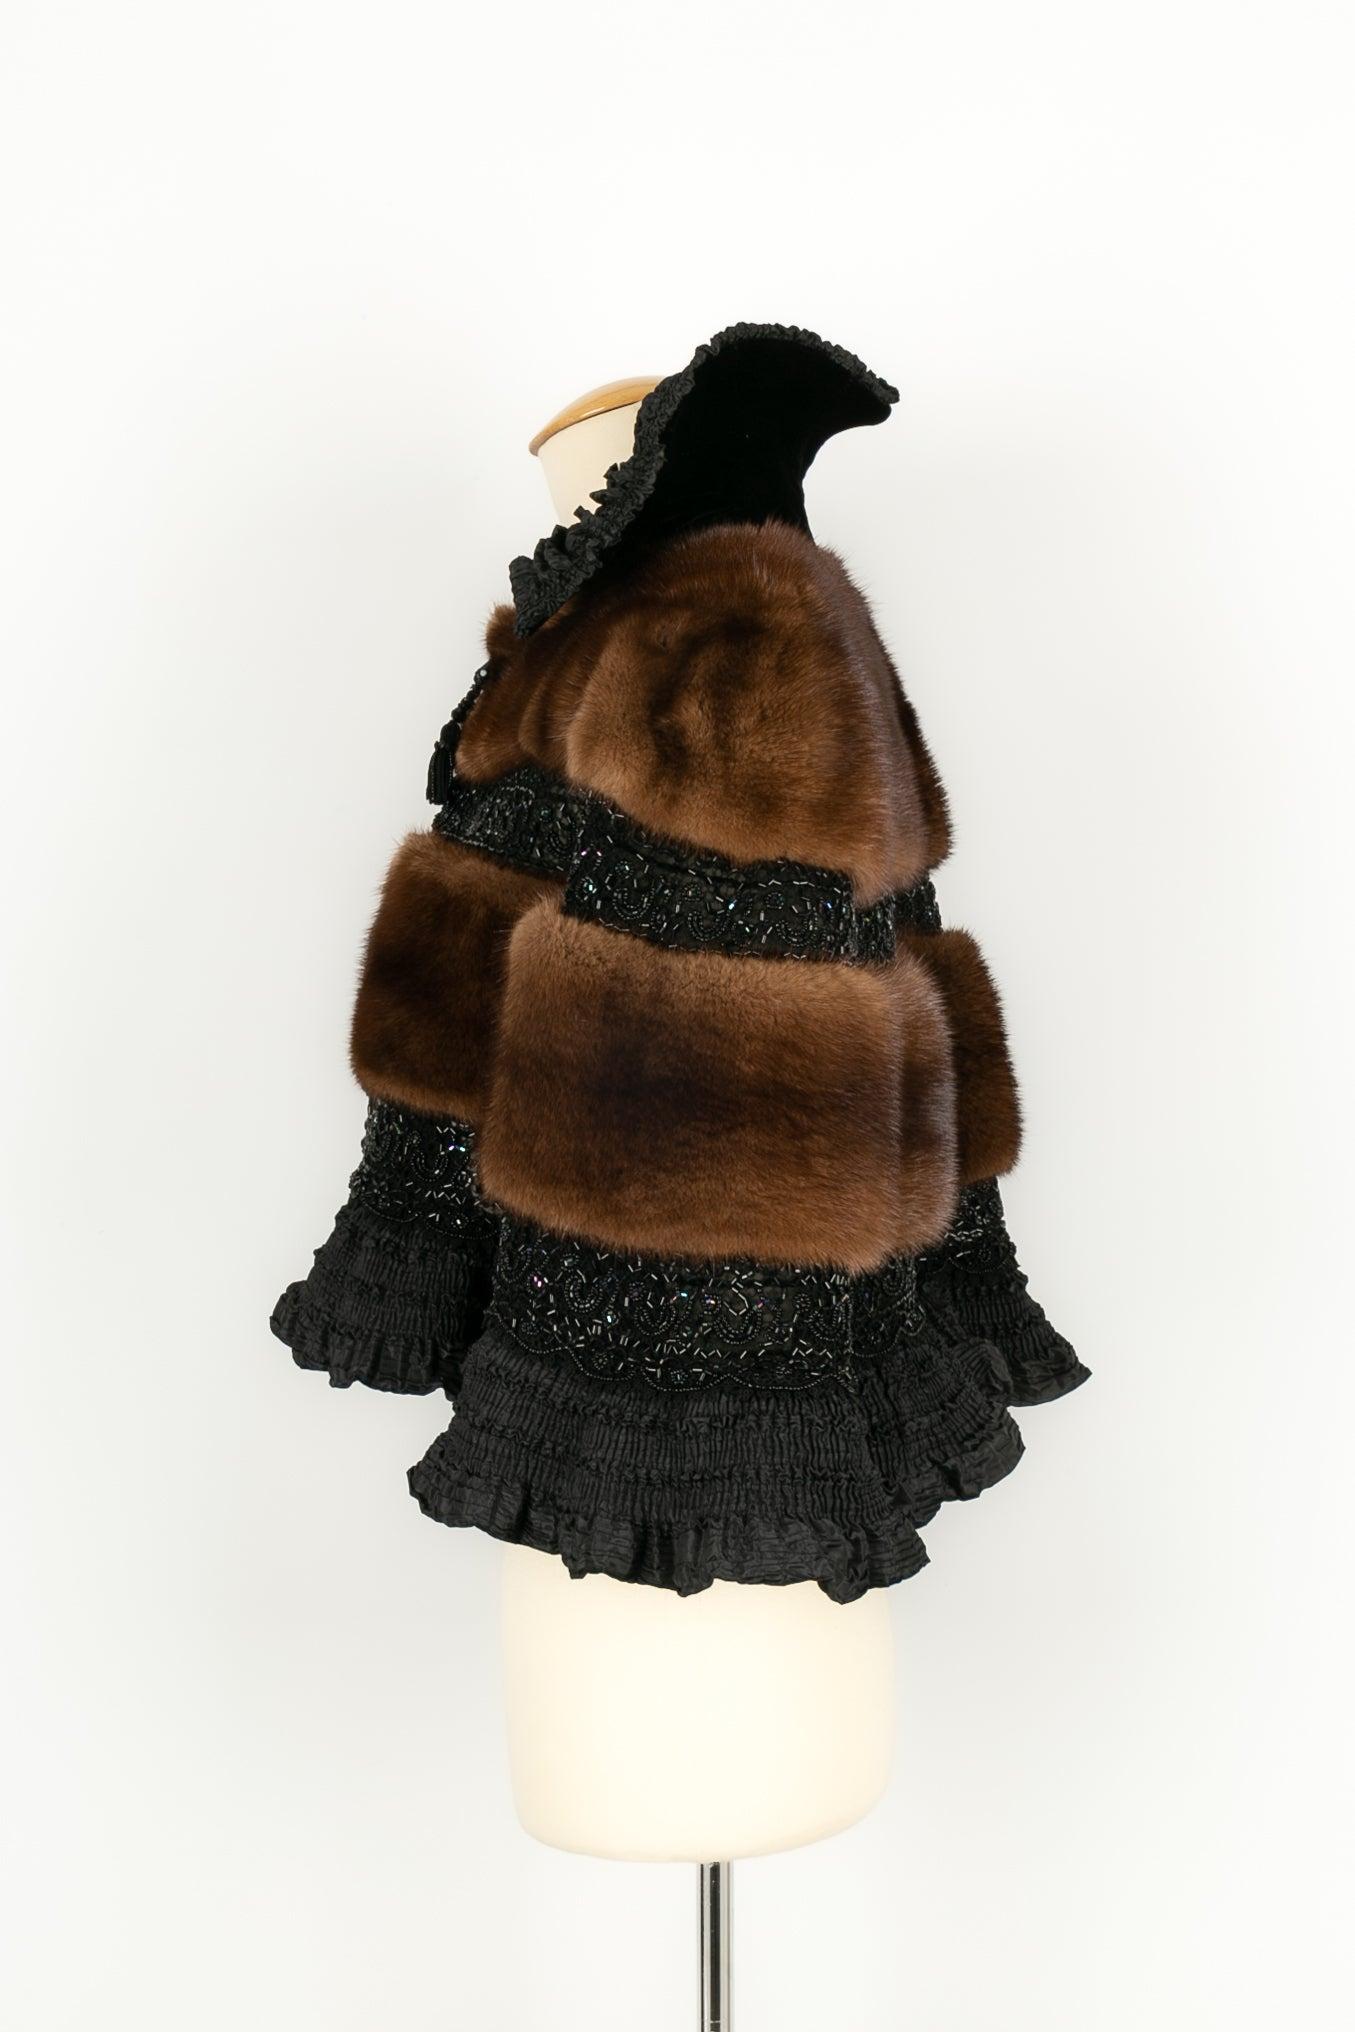 Christian Lacroix -(Made in France) Cape in taffeta, lace, beads and mink fur. Size 38FR. Ready-to-wear collection Fall-Winter 1998/99.

Additional information: 
Dimensions: Shoulder width: 42 cm, Length: 43 cm
Condition: Very good condition
Seller